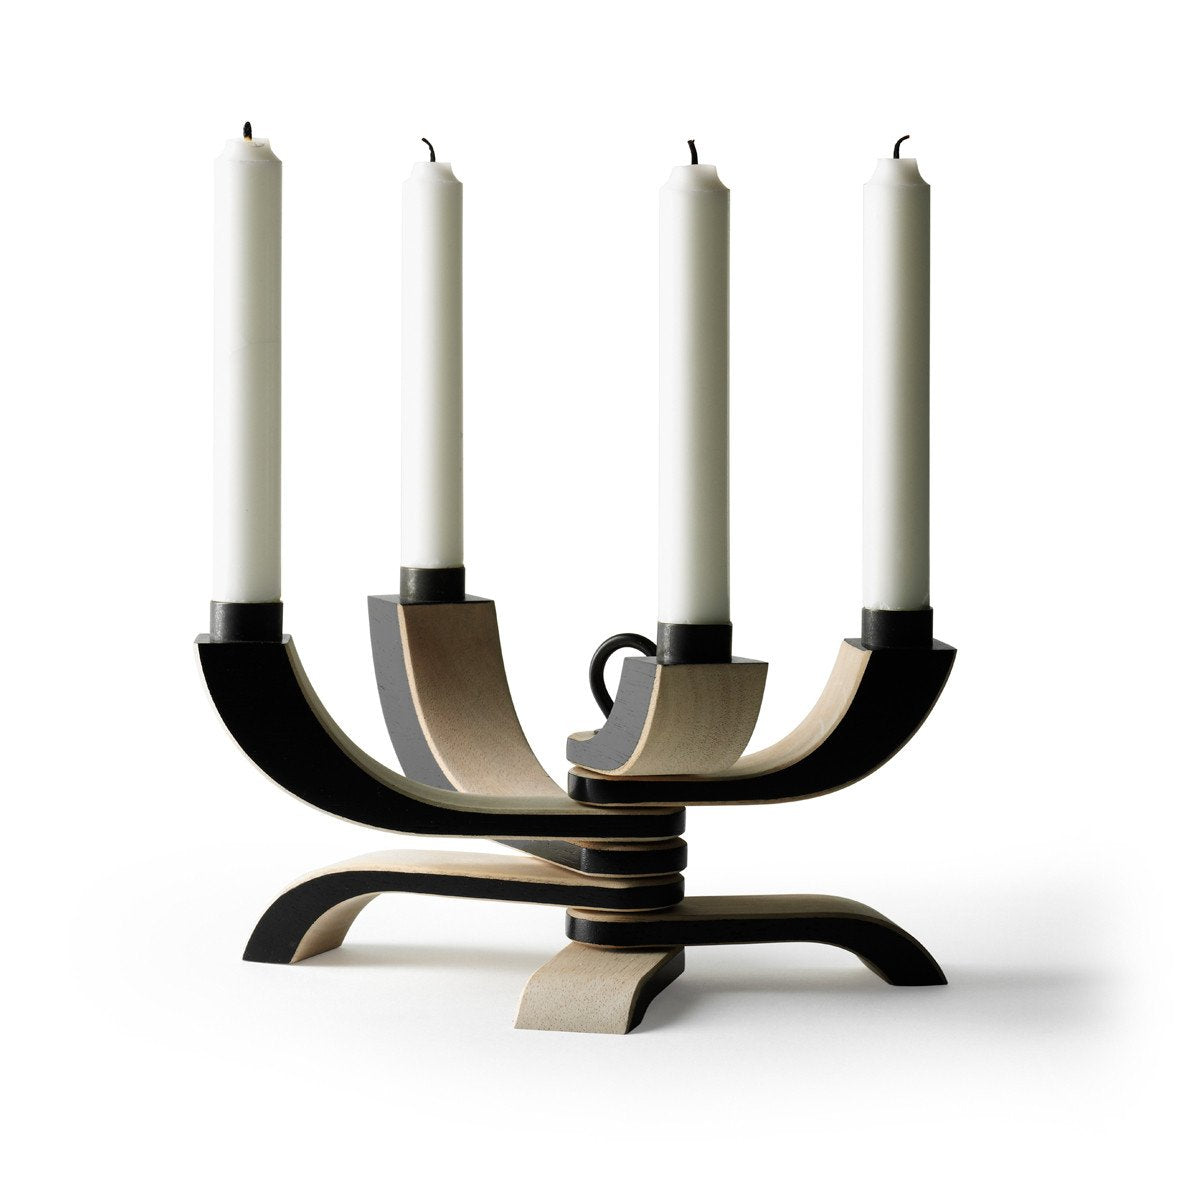 Nordic Light Candle Holder 4 Arms in Black - Blabar